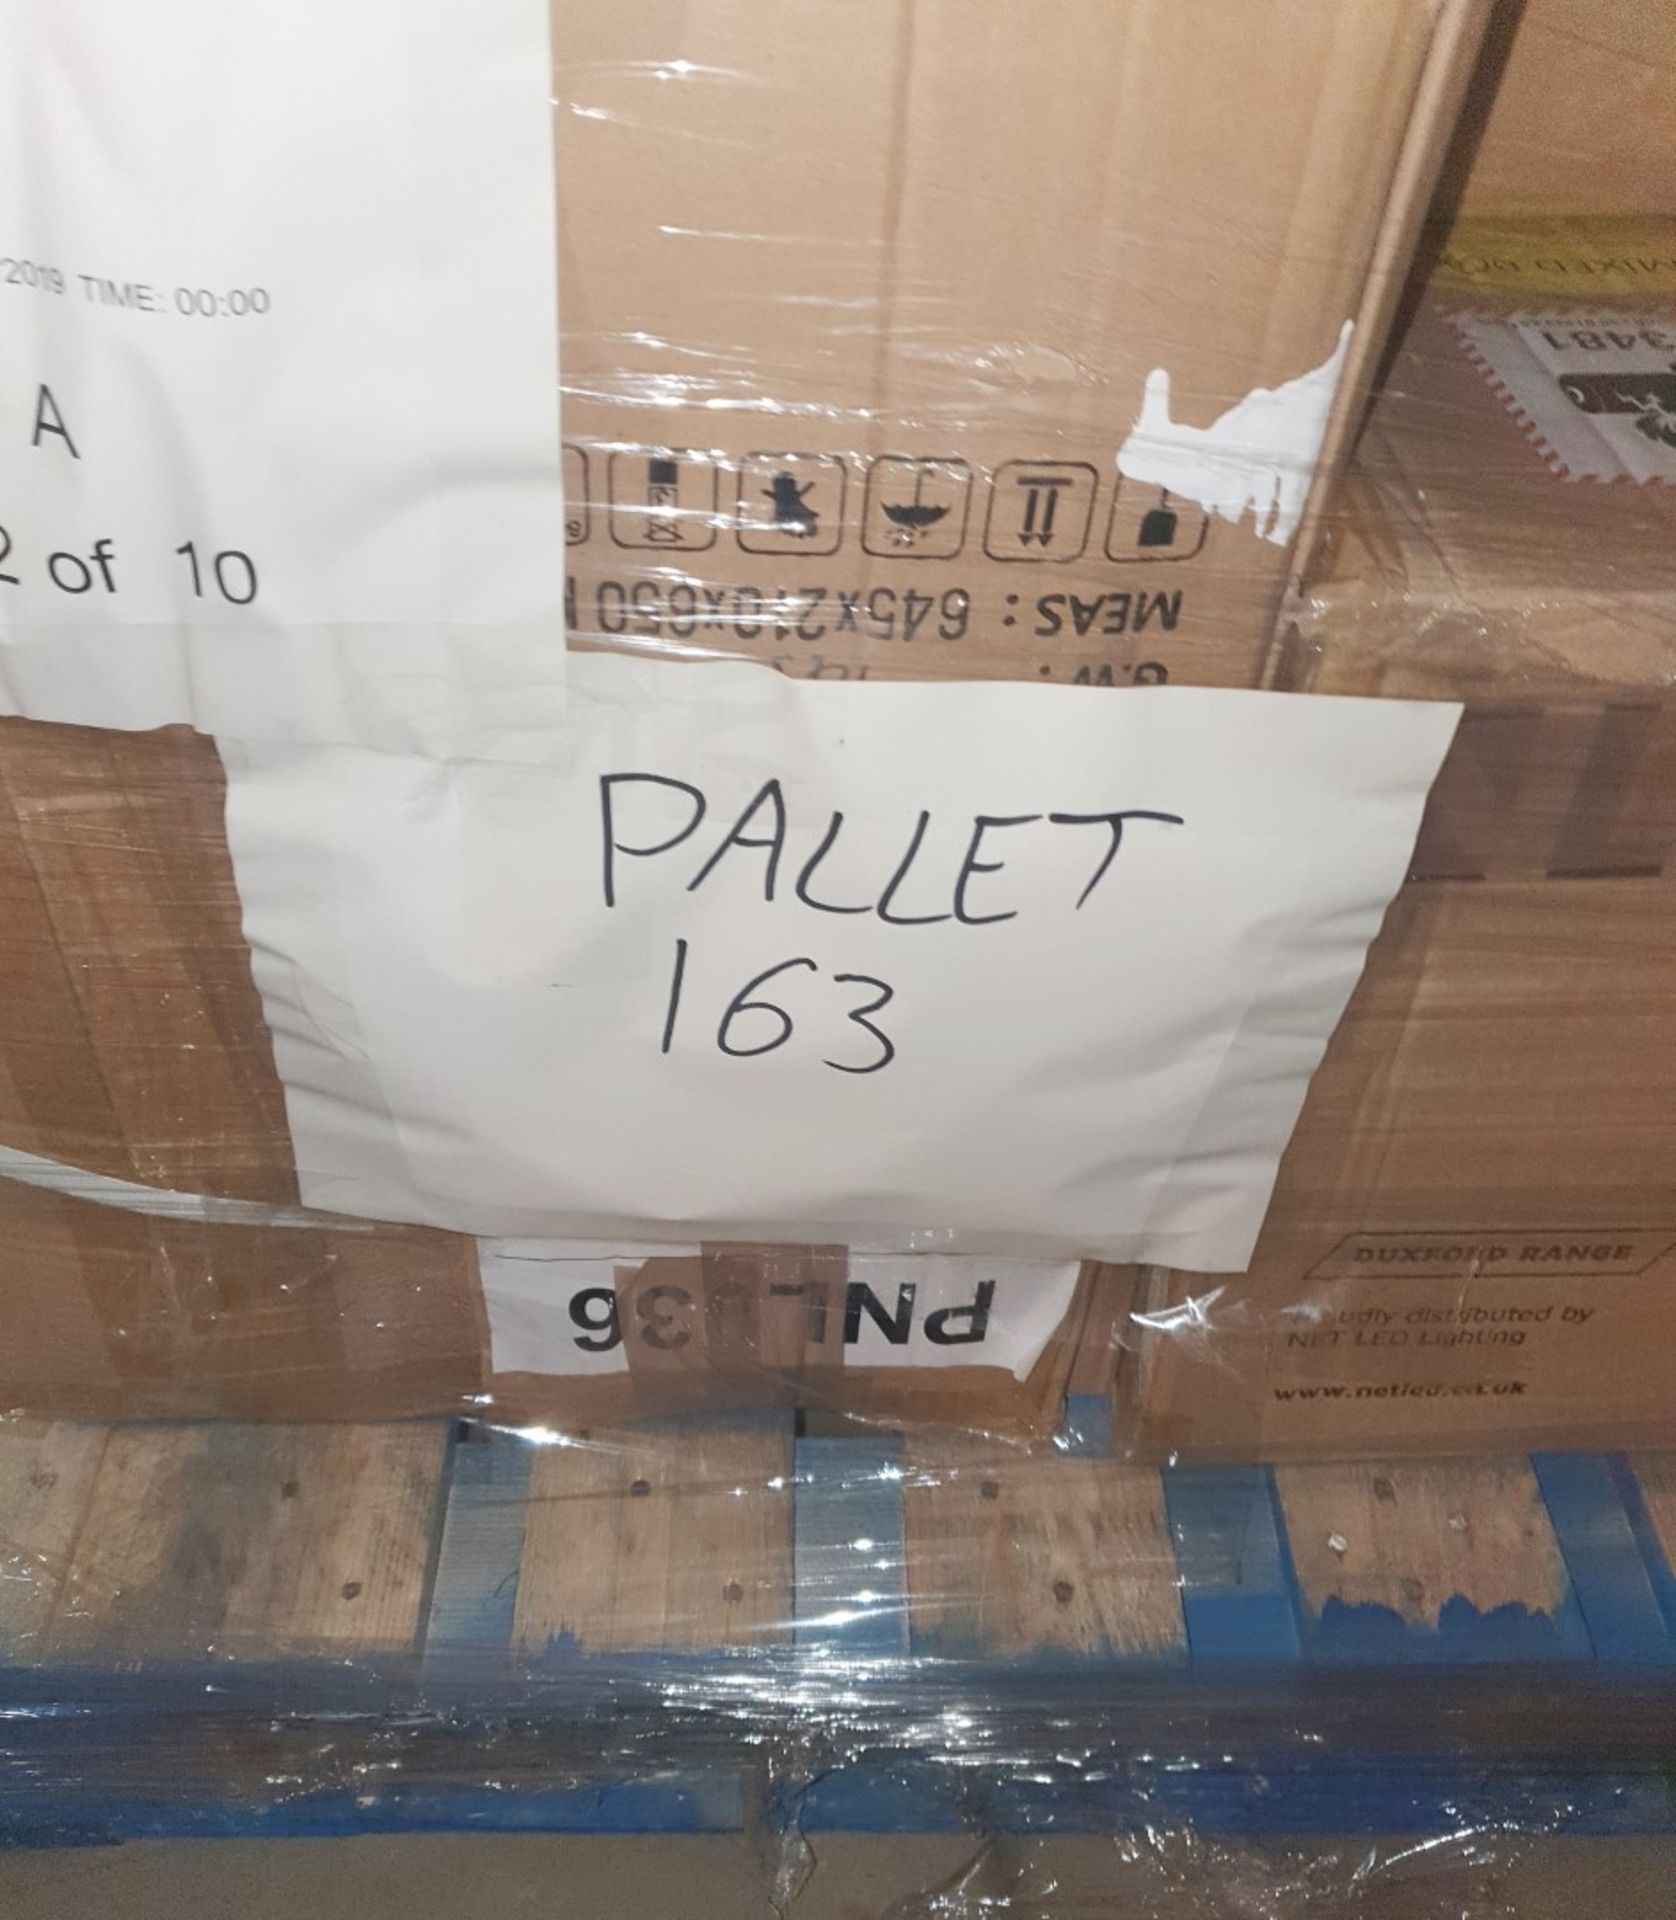 2 Pallets of Assorted Lighting and Electrical - Sockets, Lights, Switches - Ref: 162, 163 - CL460 - Bild 4 aus 9